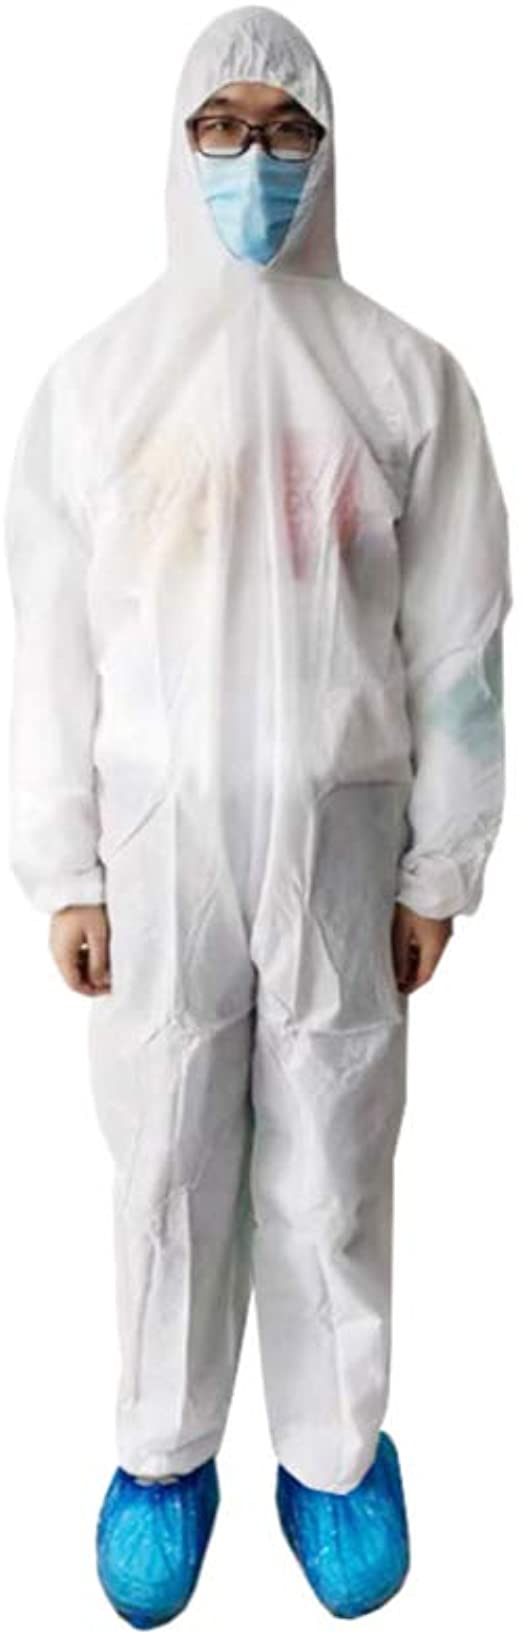 IMIKEYA 1PC Disposable Medical Isolation Clothing Security Protection Clothes Labour Suit One-Pieces Costume (White, Size L)